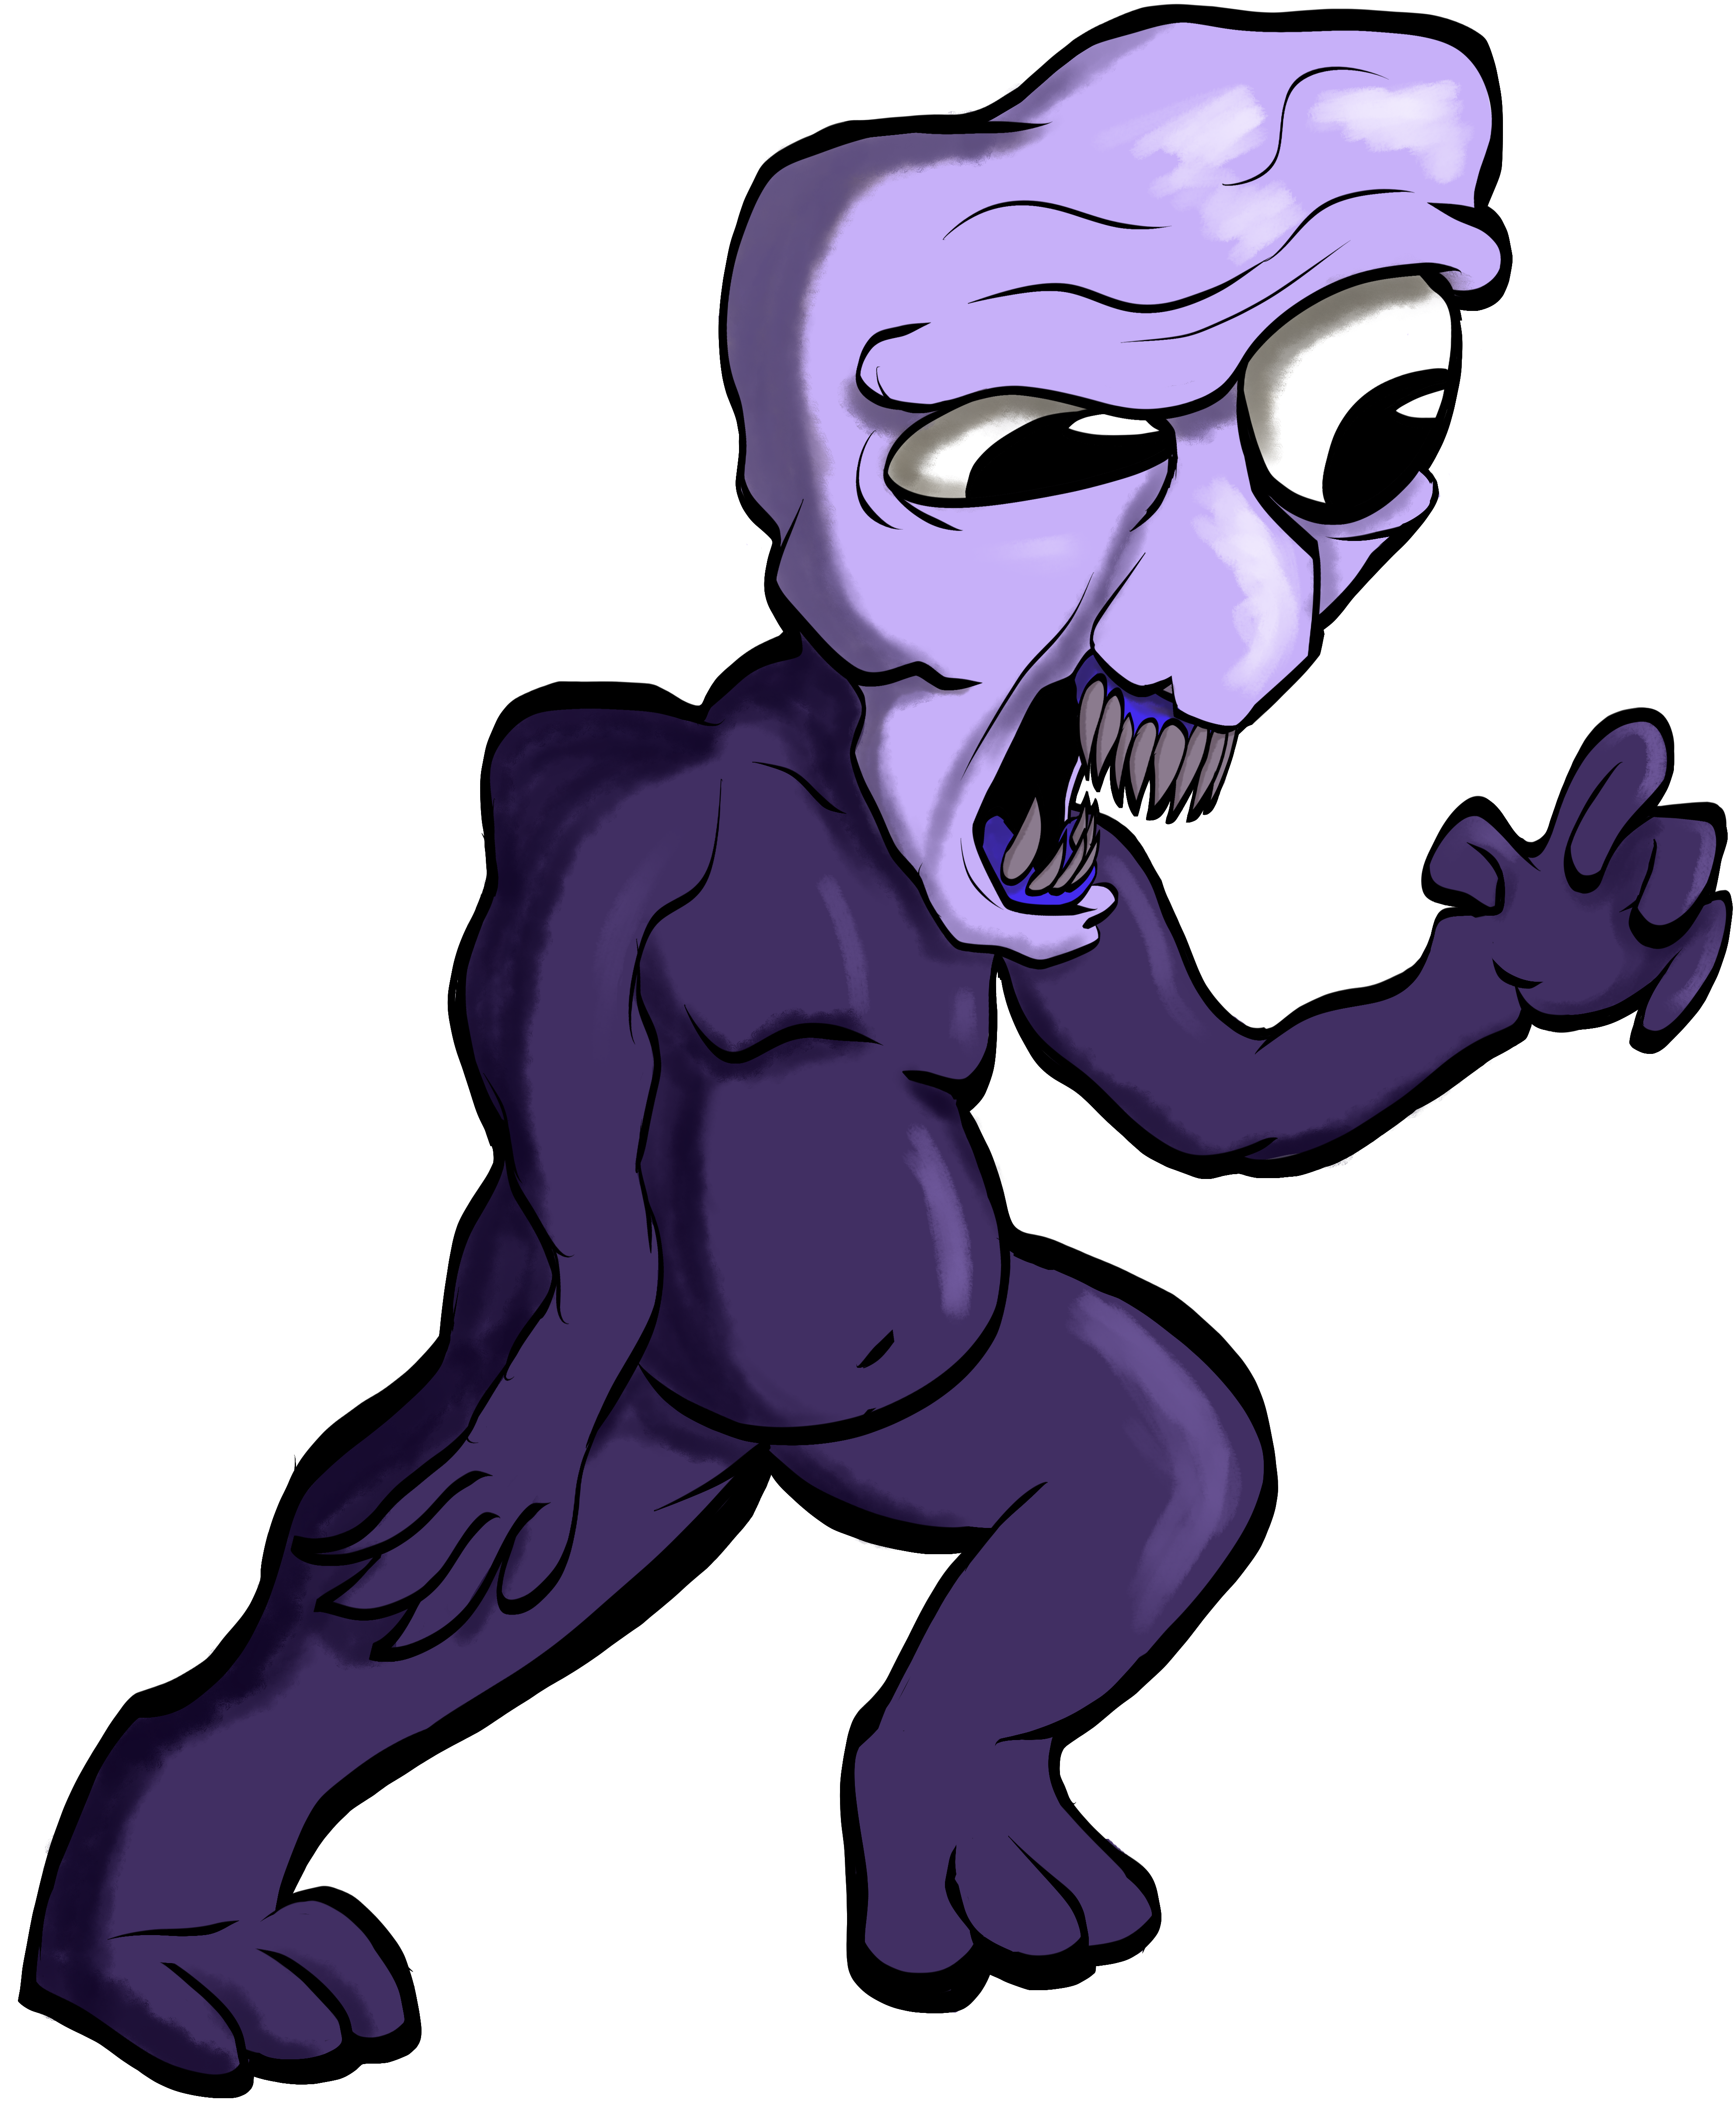 Ao Oni by SaraHericProductions on DeviantArt